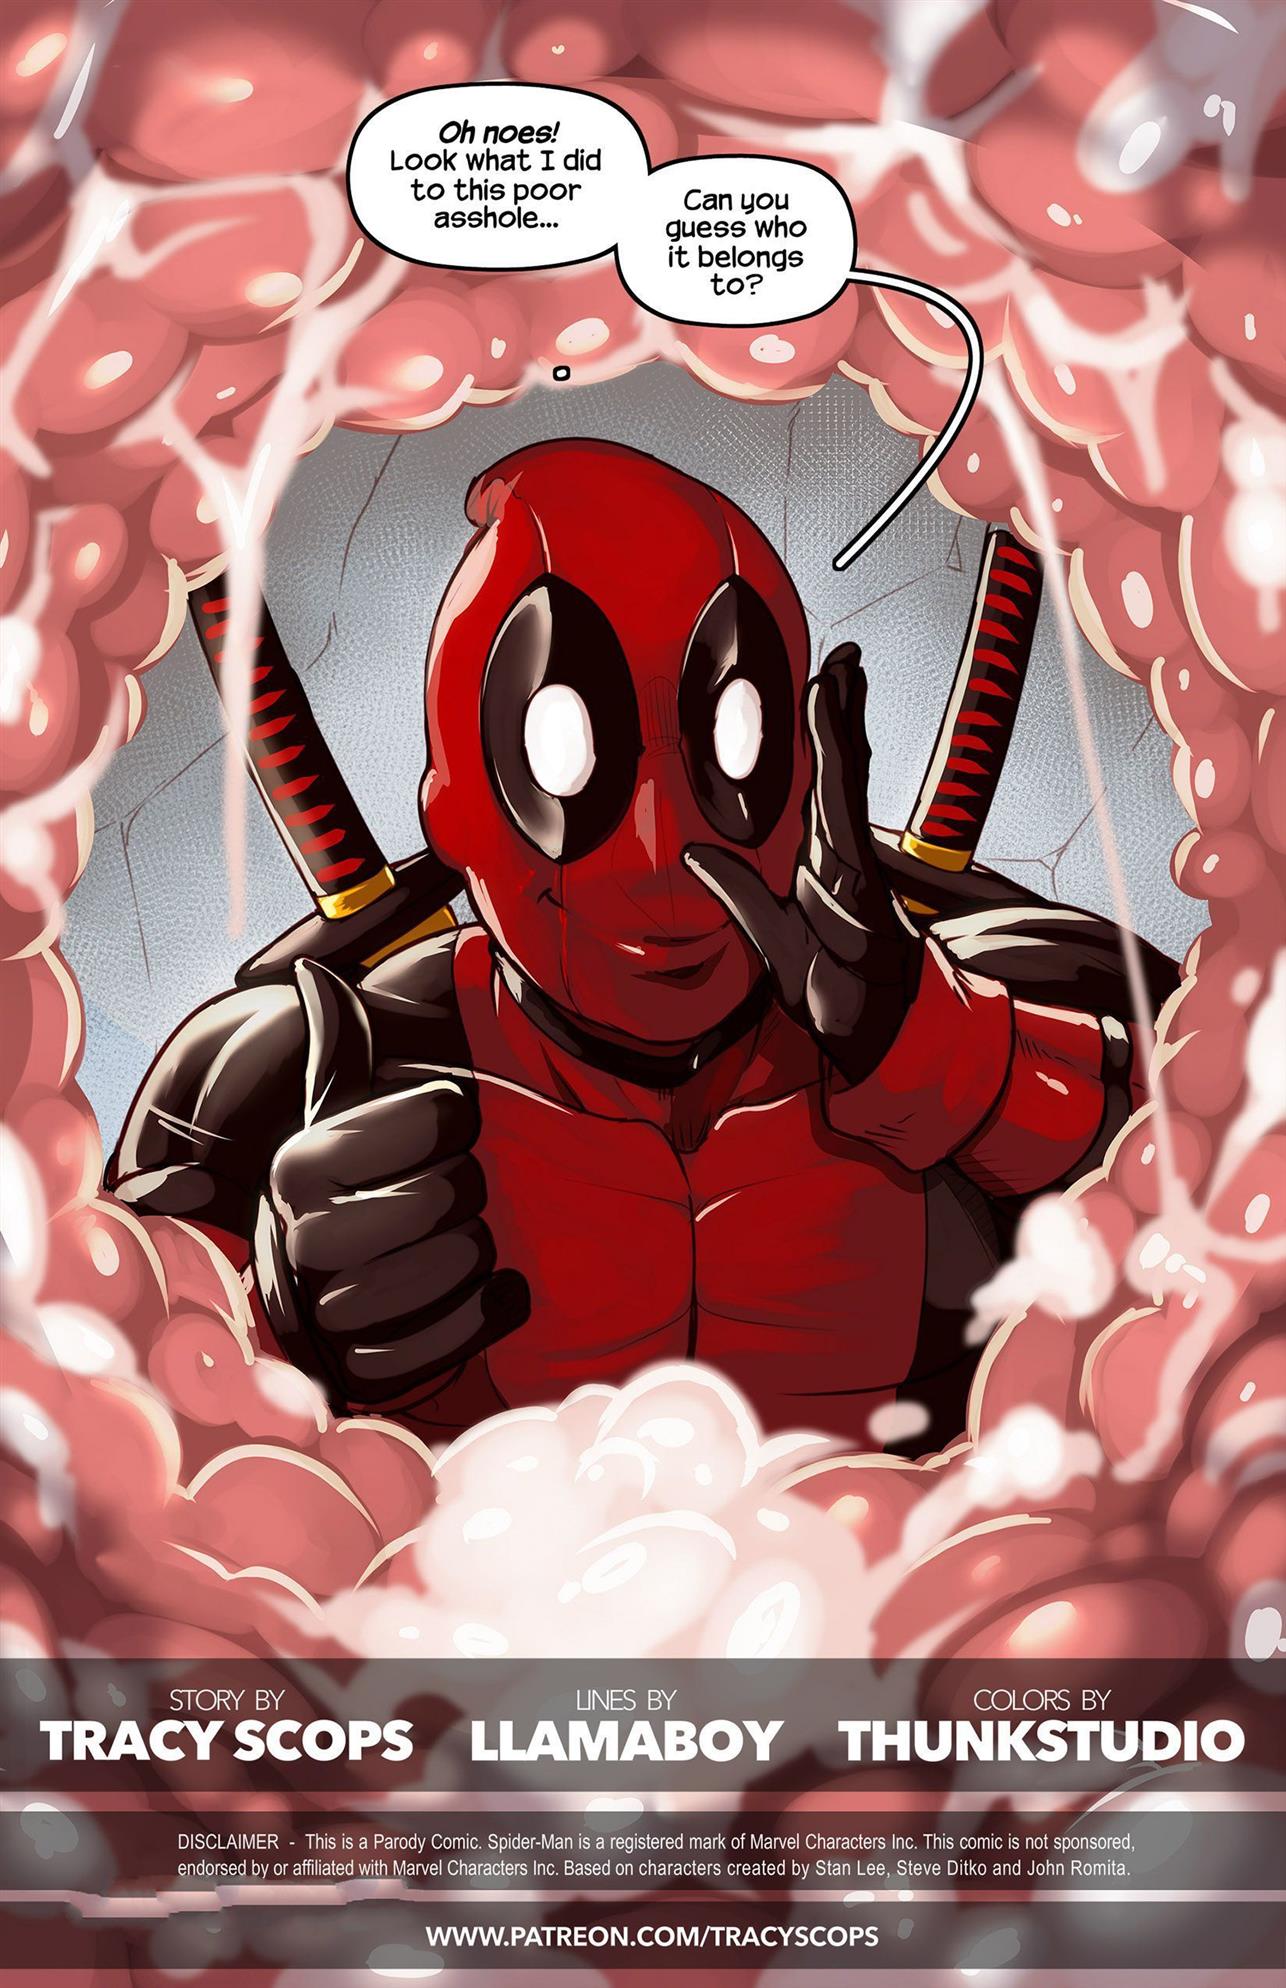 Deadpool Thinking With Portals (Deadpool) [Tracy Scops]